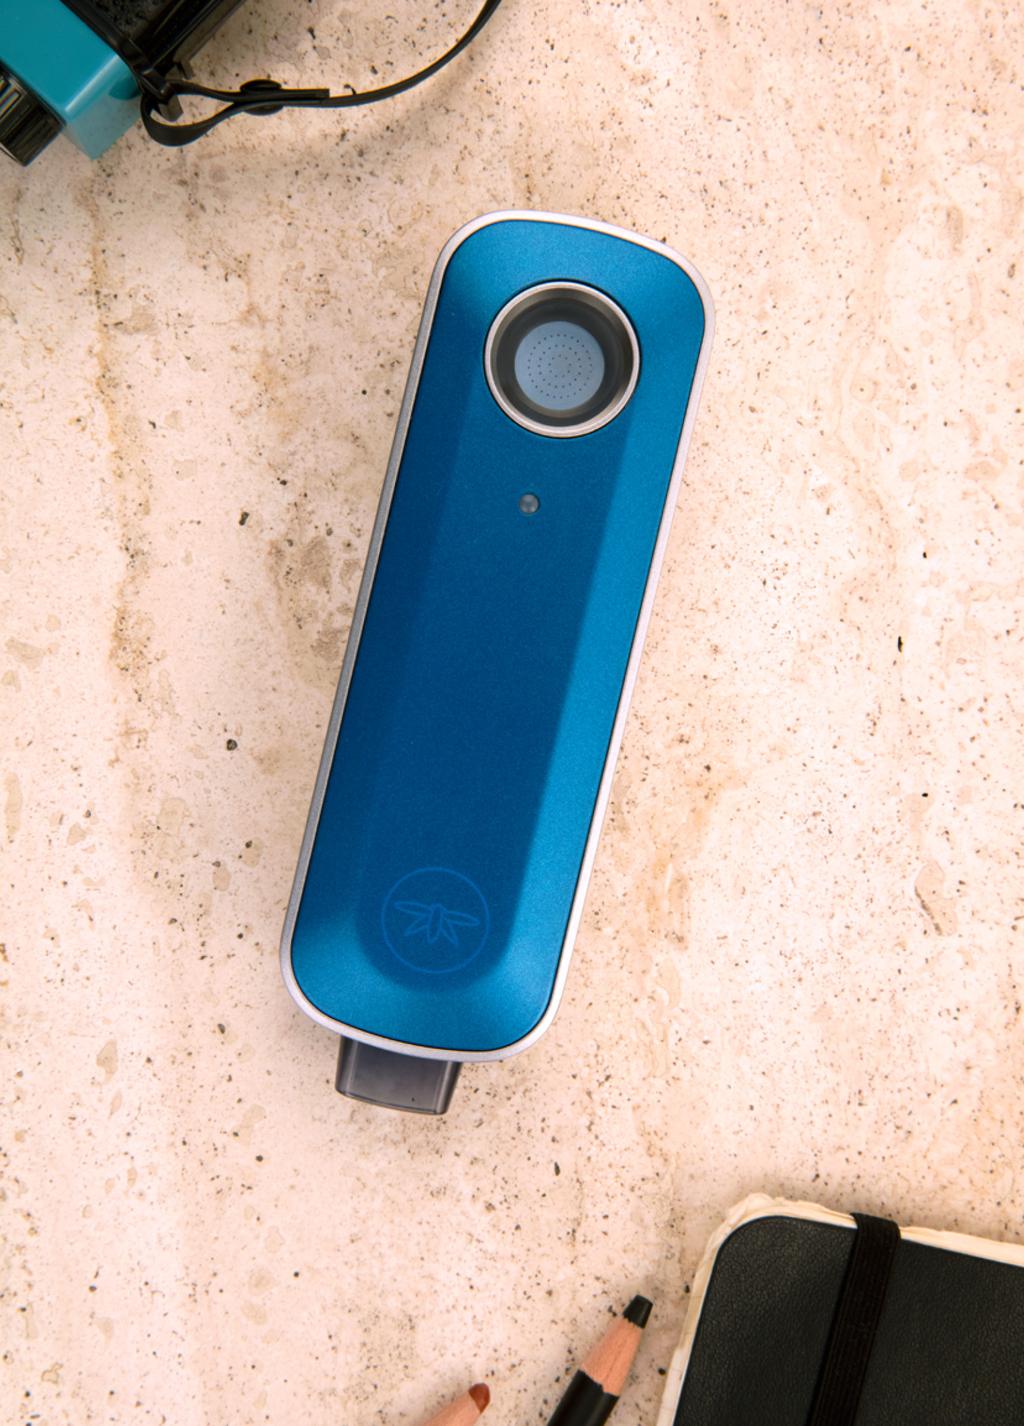 CONTENTS 2 MEET FIREFLY 2, YOUR NEW BEST FRIEND. The more you get to know Firefly 2, the more he can do for you. Your travel buddy is smart and you will find adventures are smooth under his guidance.